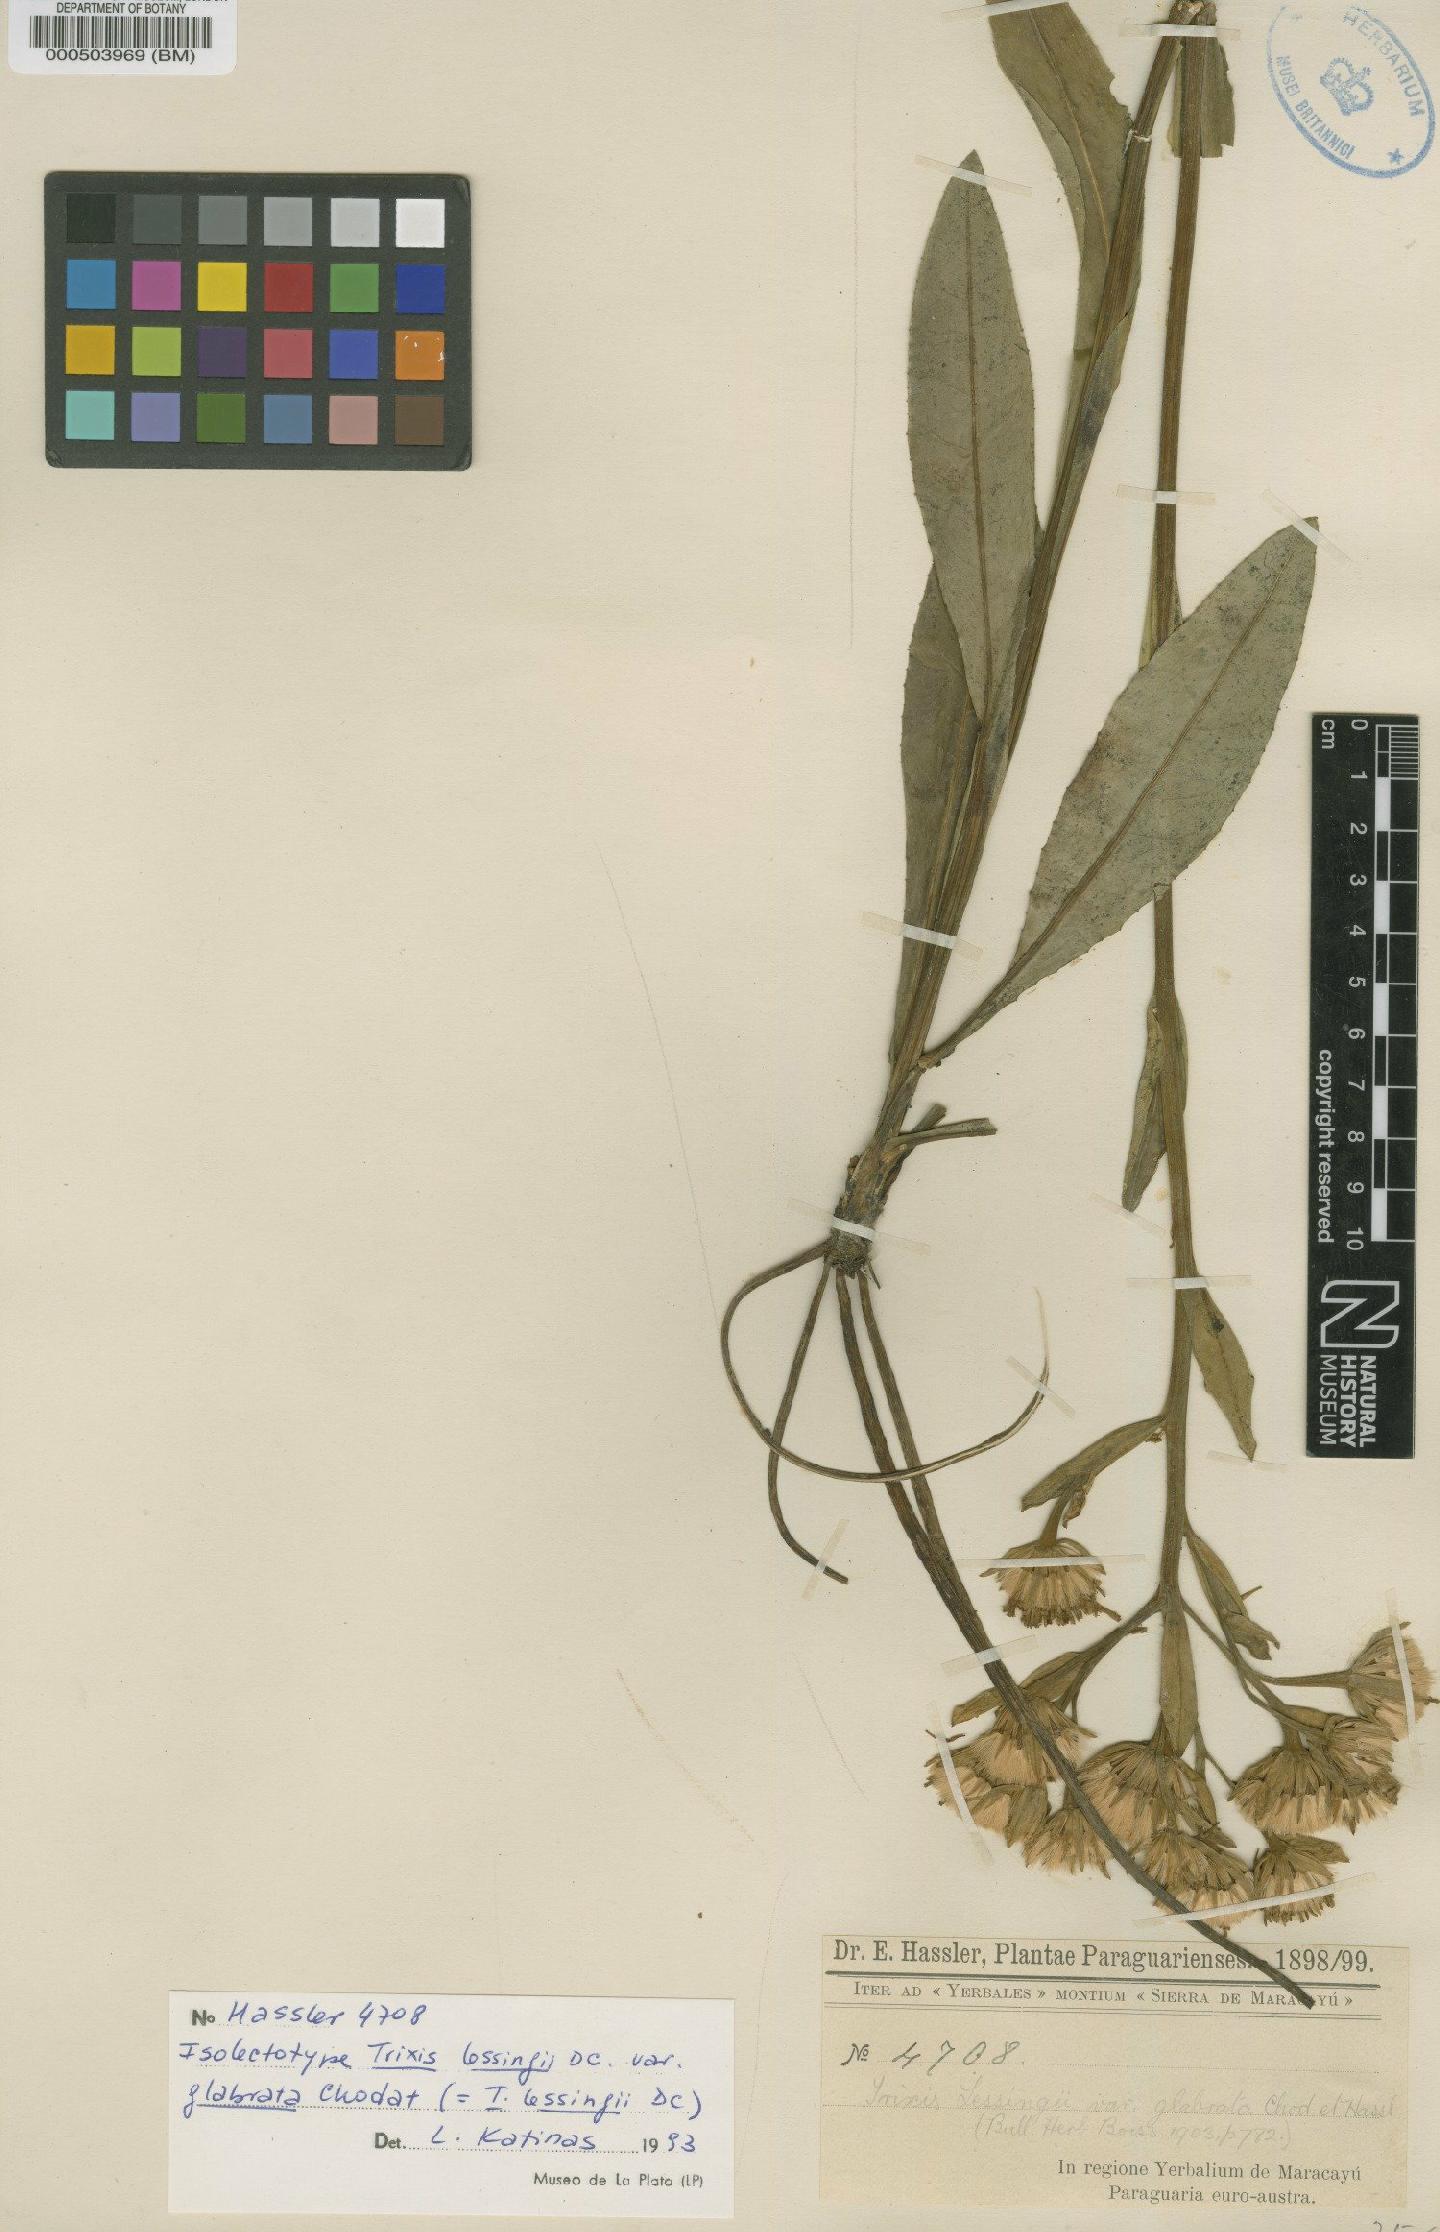 To NHMUK collection (Trixis lessingii DC.; Isolectotype; NHMUK:ecatalogue:4567348)